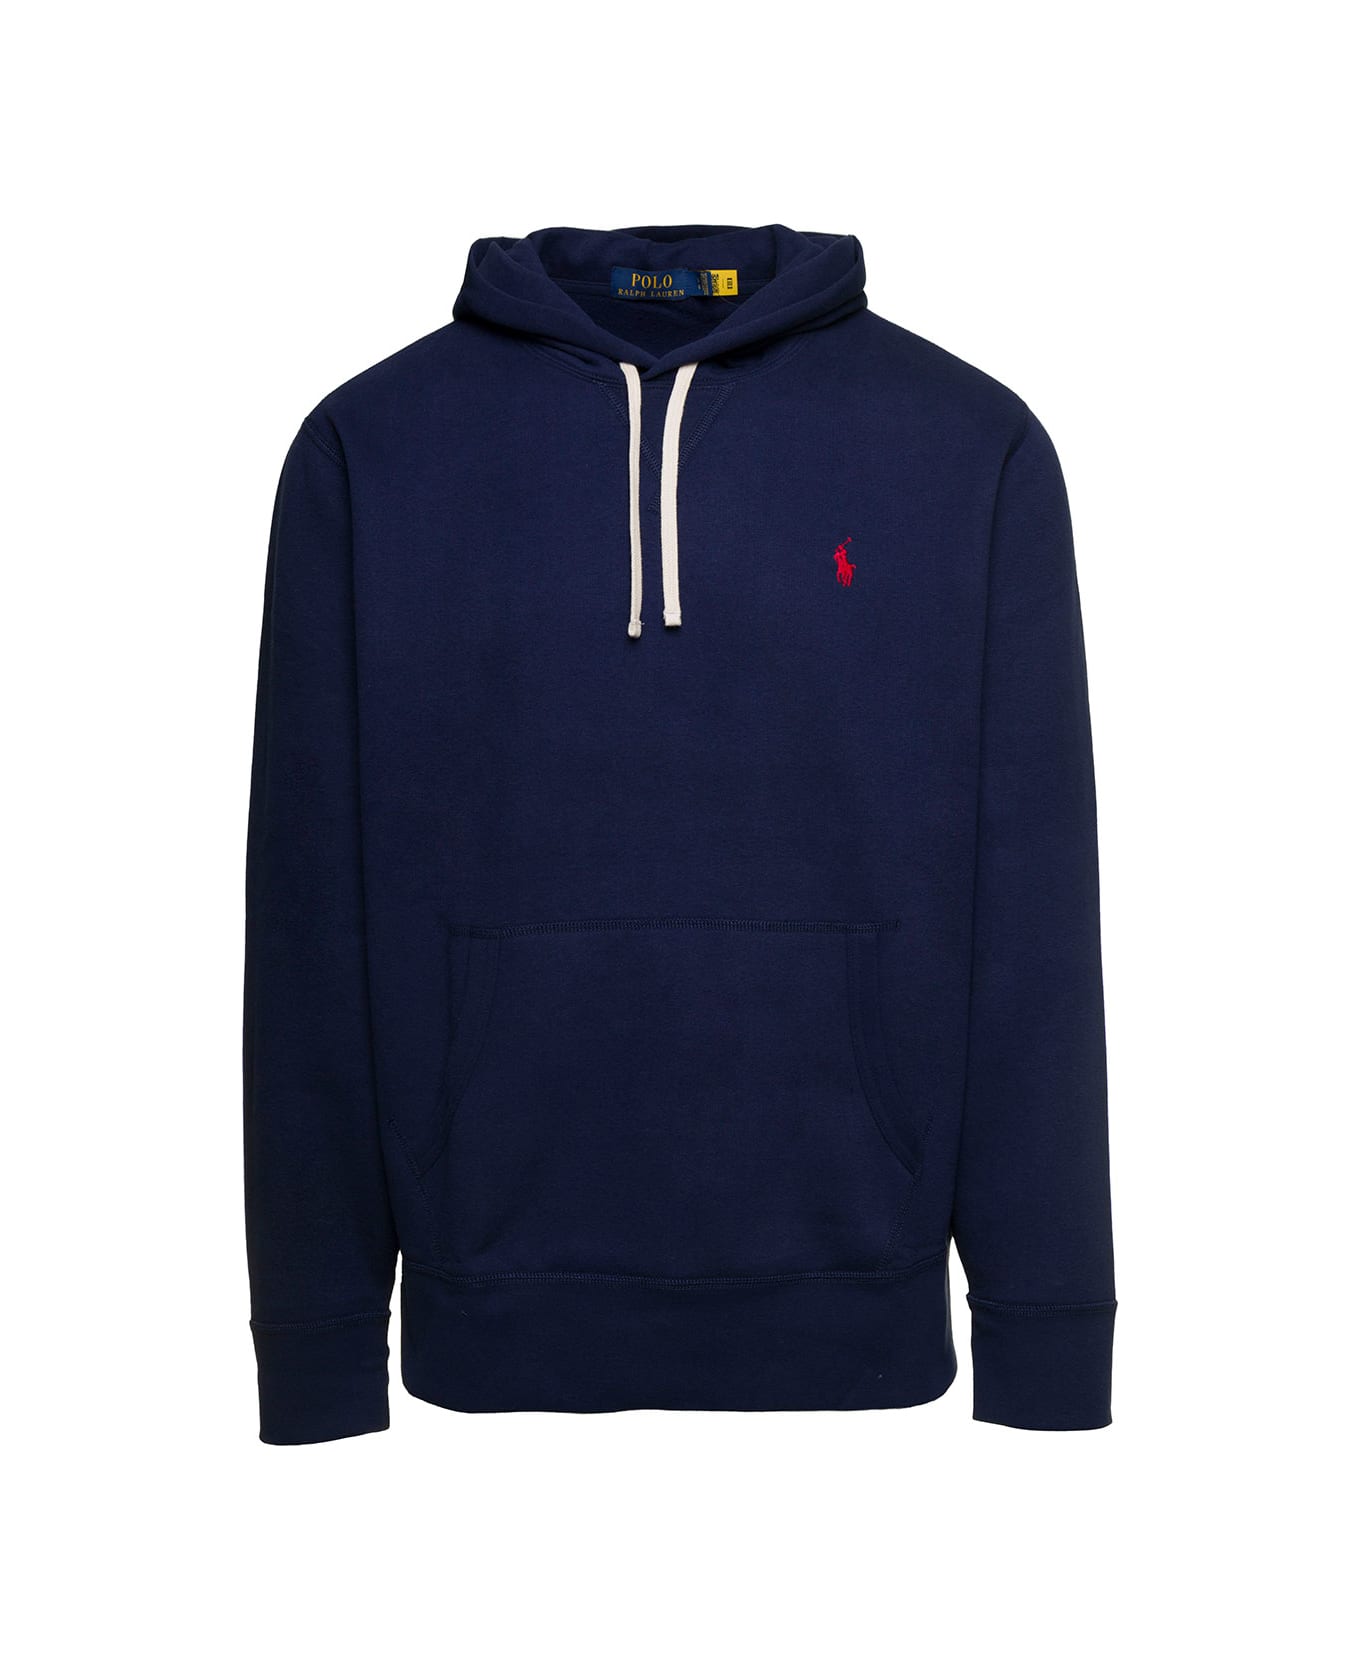 Polo Ralph Lauren Blue Hoodie With Drawstring And Embroidered Logo In Cotton Man - Cruise navy